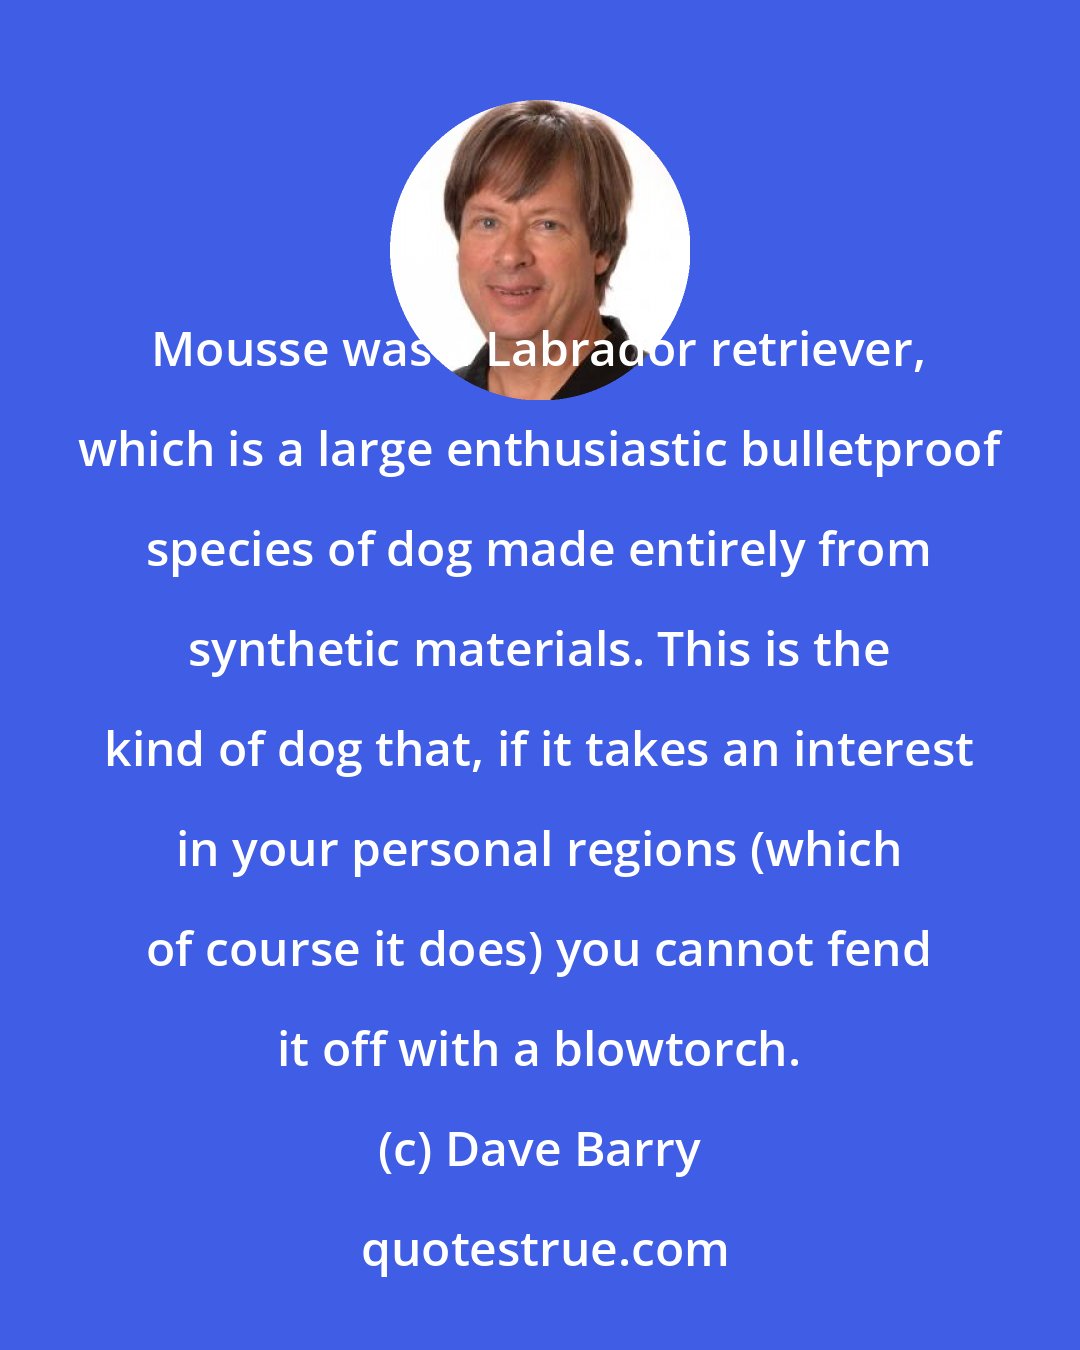 Dave Barry: Mousse was a Labrador retriever, which is a large enthusiastic bulletproof species of dog made entirely from synthetic materials. This is the kind of dog that, if it takes an interest in your personal regions (which of course it does) you cannot fend it off with a blowtorch.